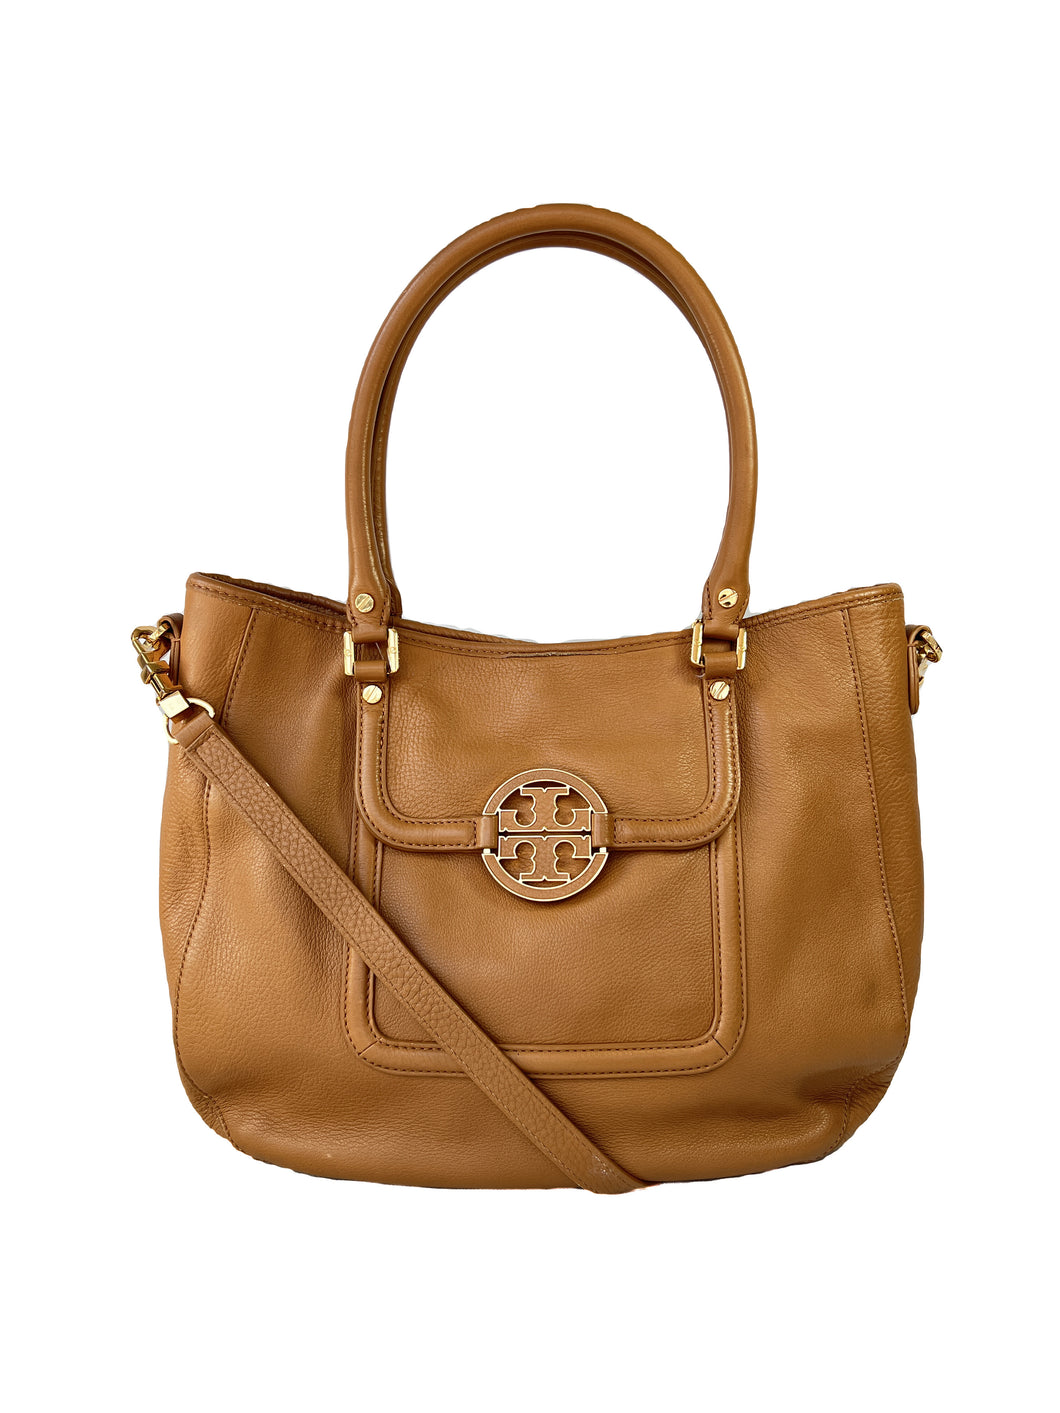 Tory Burch brown leather satchel